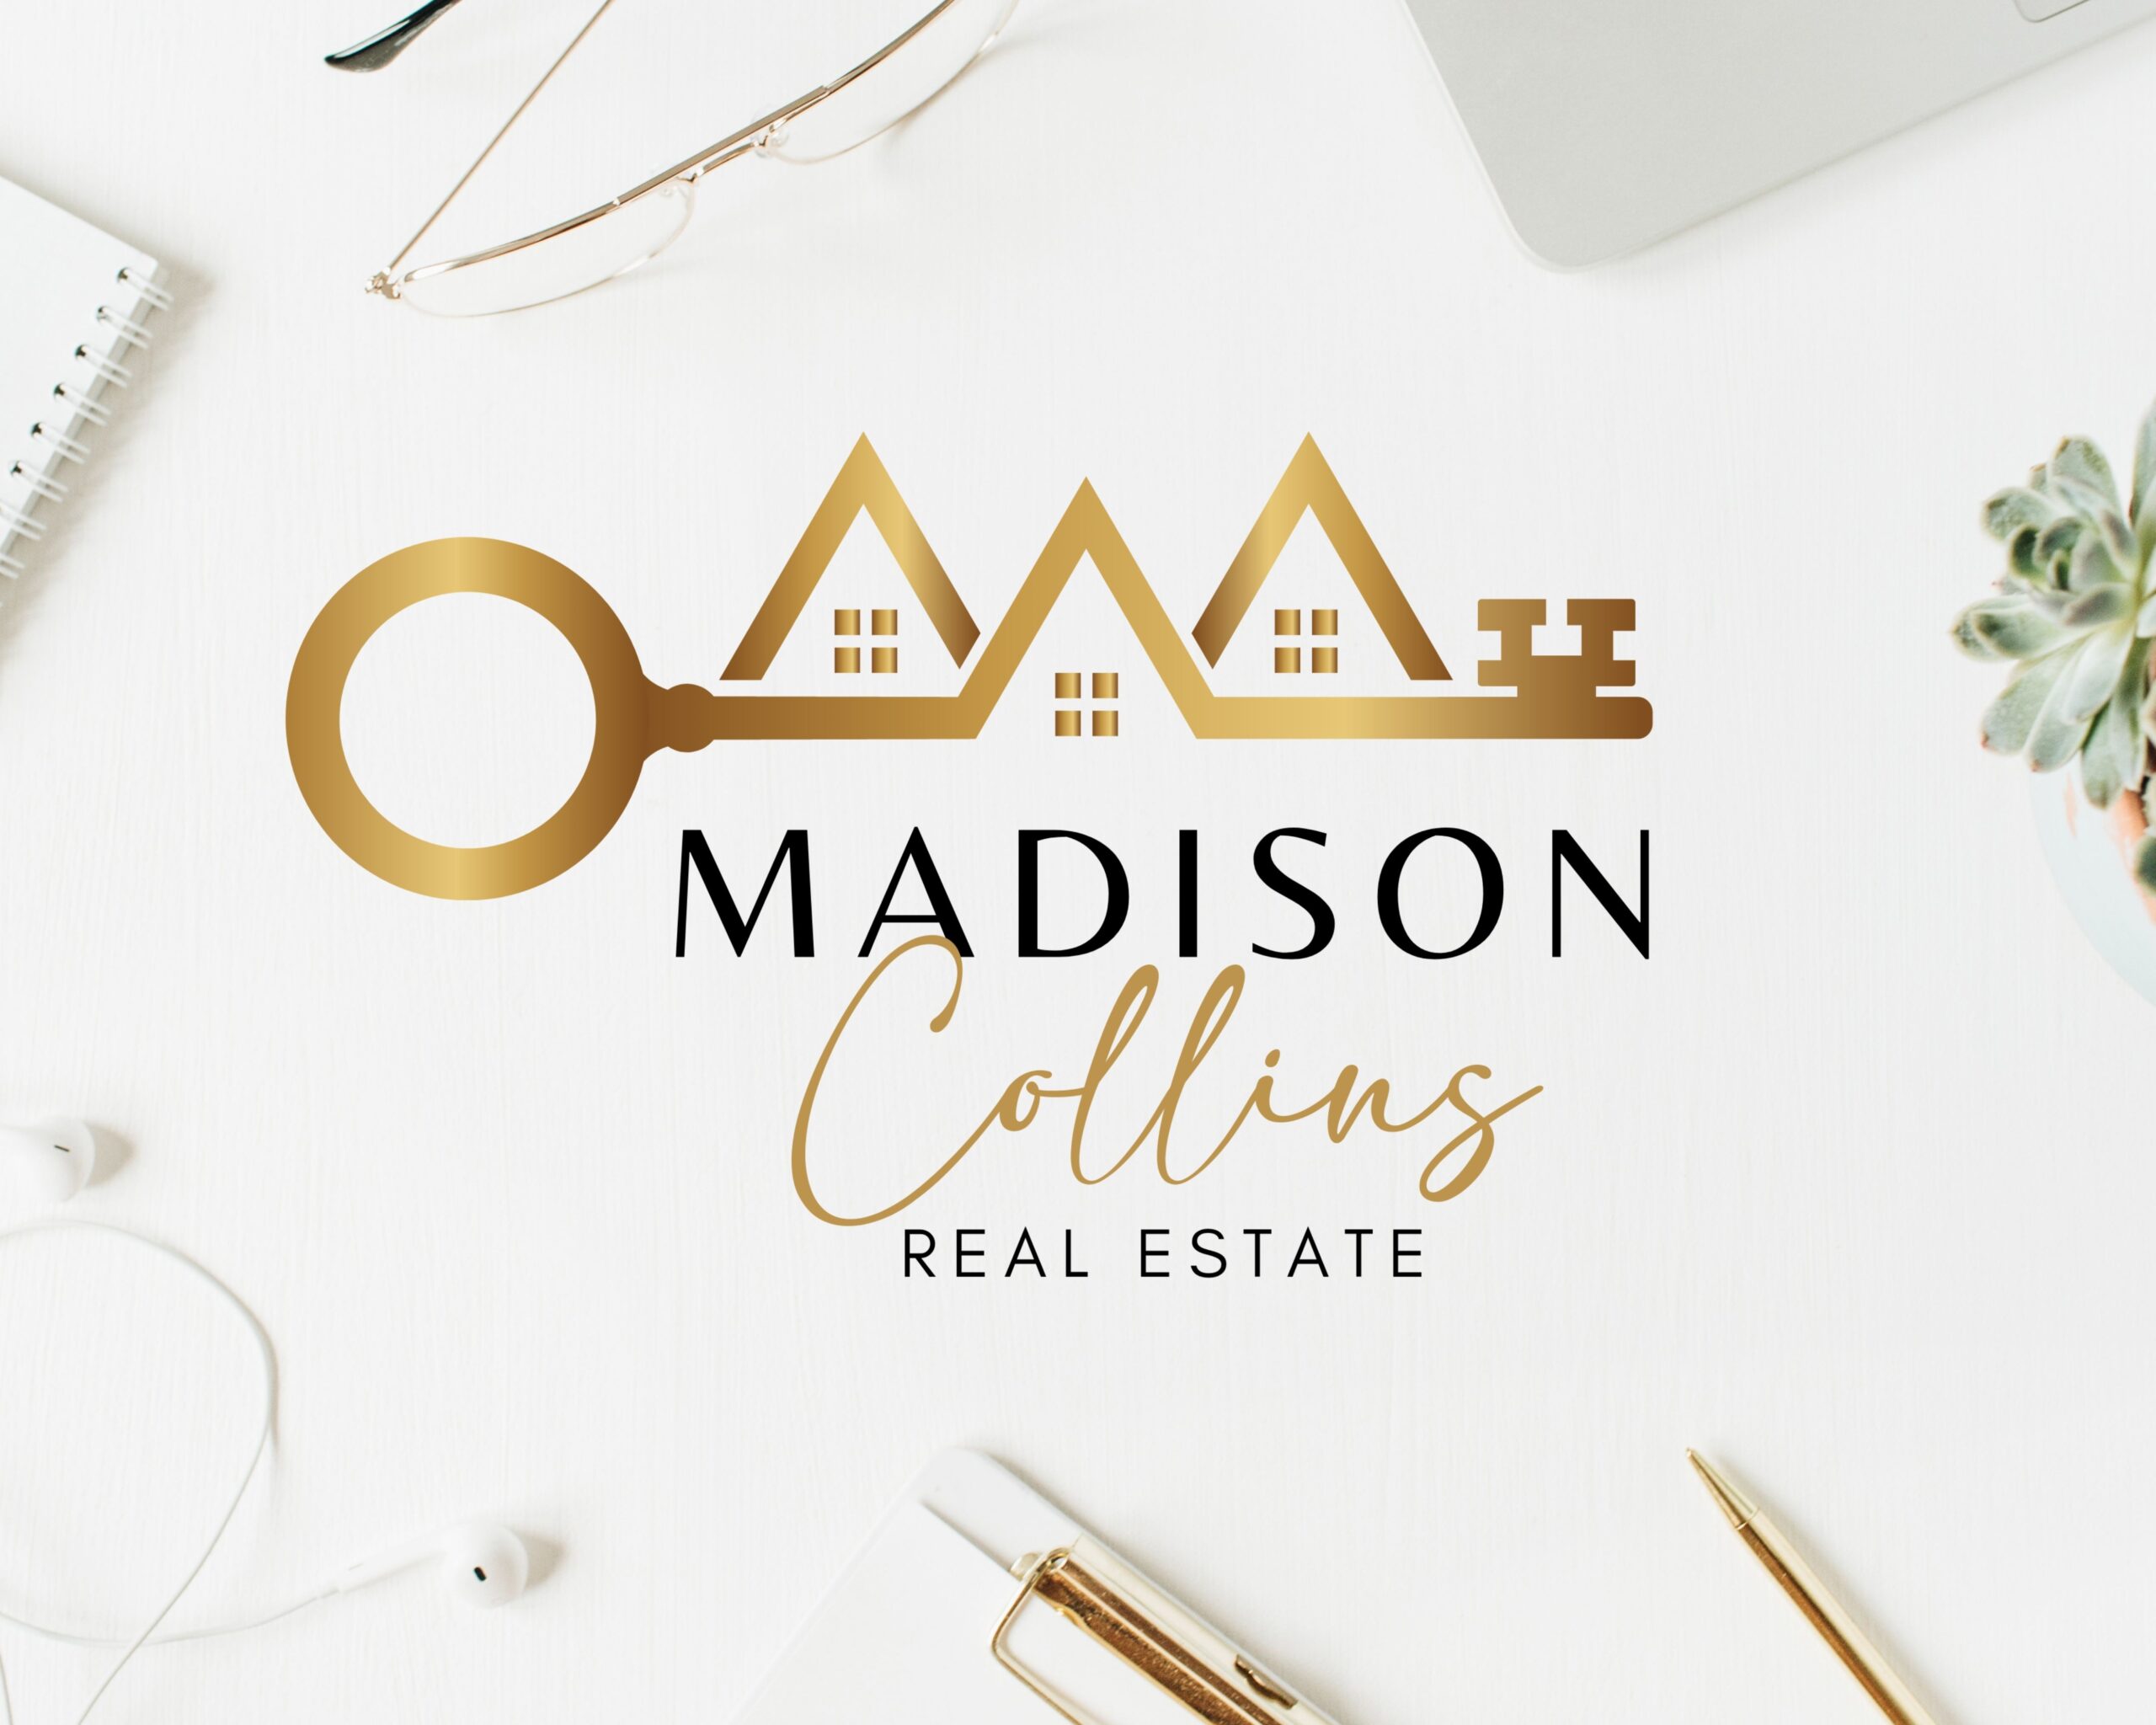 Real Estate Logo Design, House, Signature, Key, Realtor Logo, Submark and Watermarks Included, High-Quality Branding for Real Estate Agents